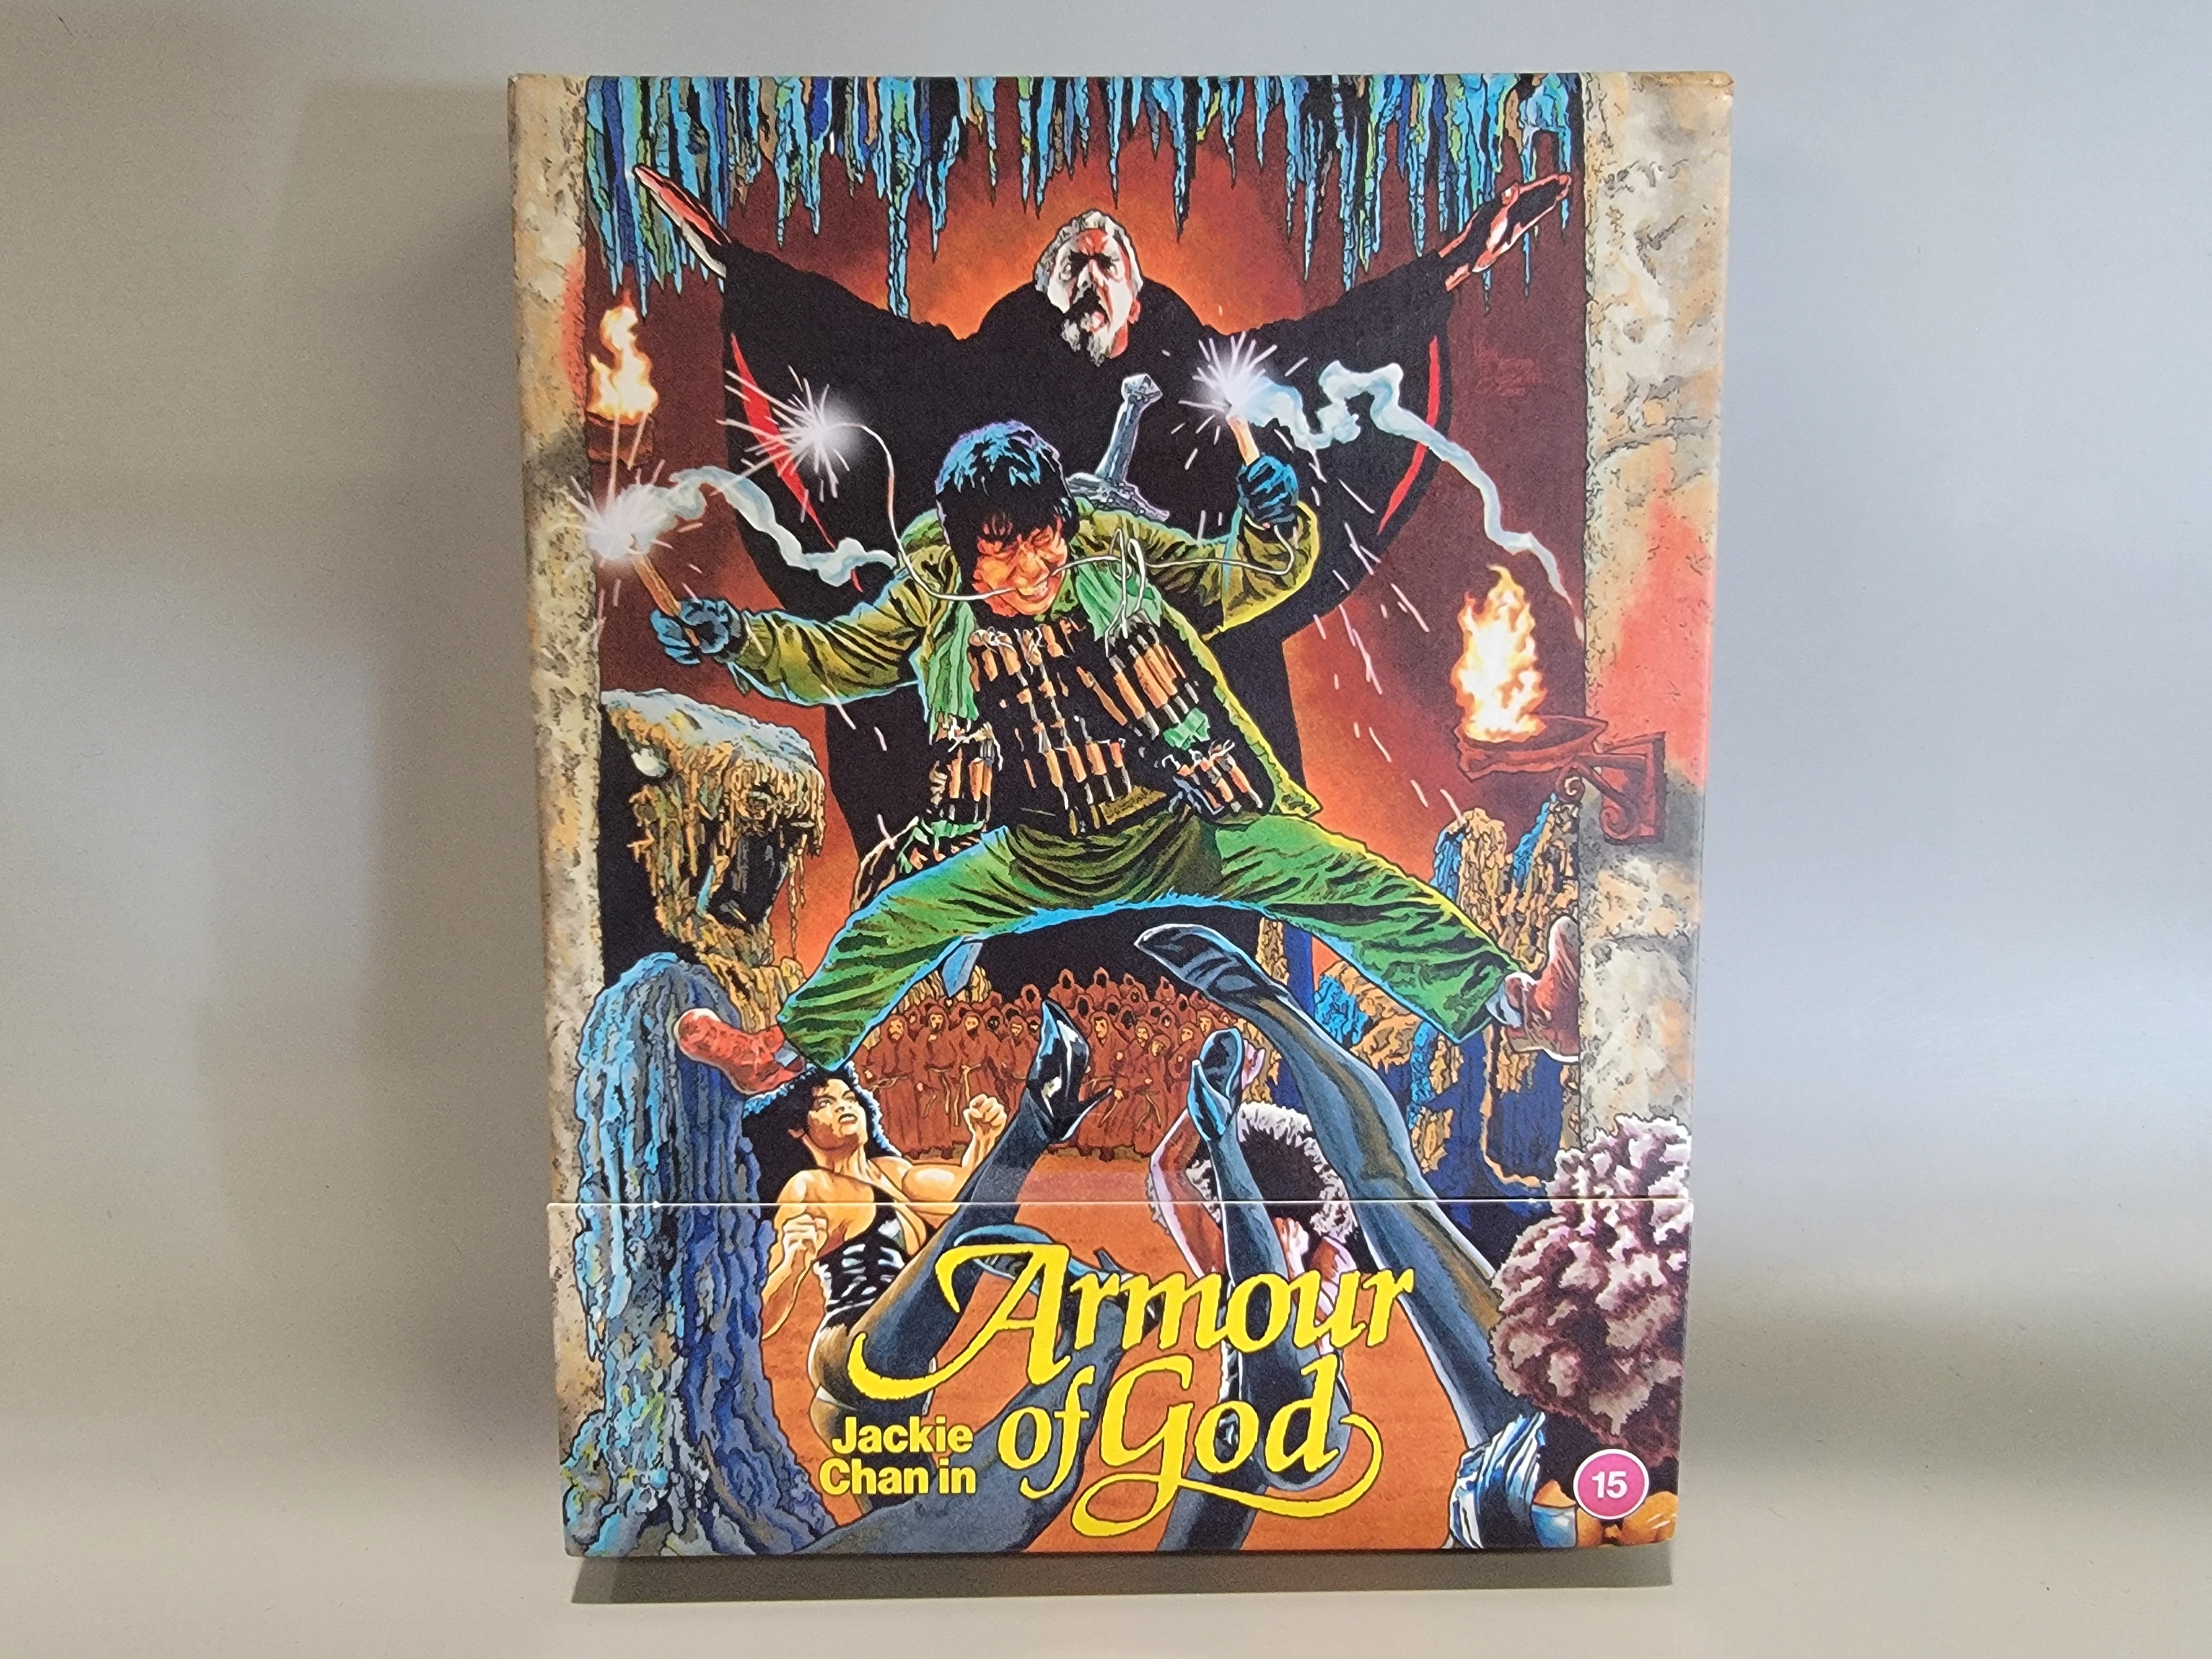 ARMOUR OF GOD (REGION B IMPORT - LIMITED EDITION) BLU-RAY [USED]